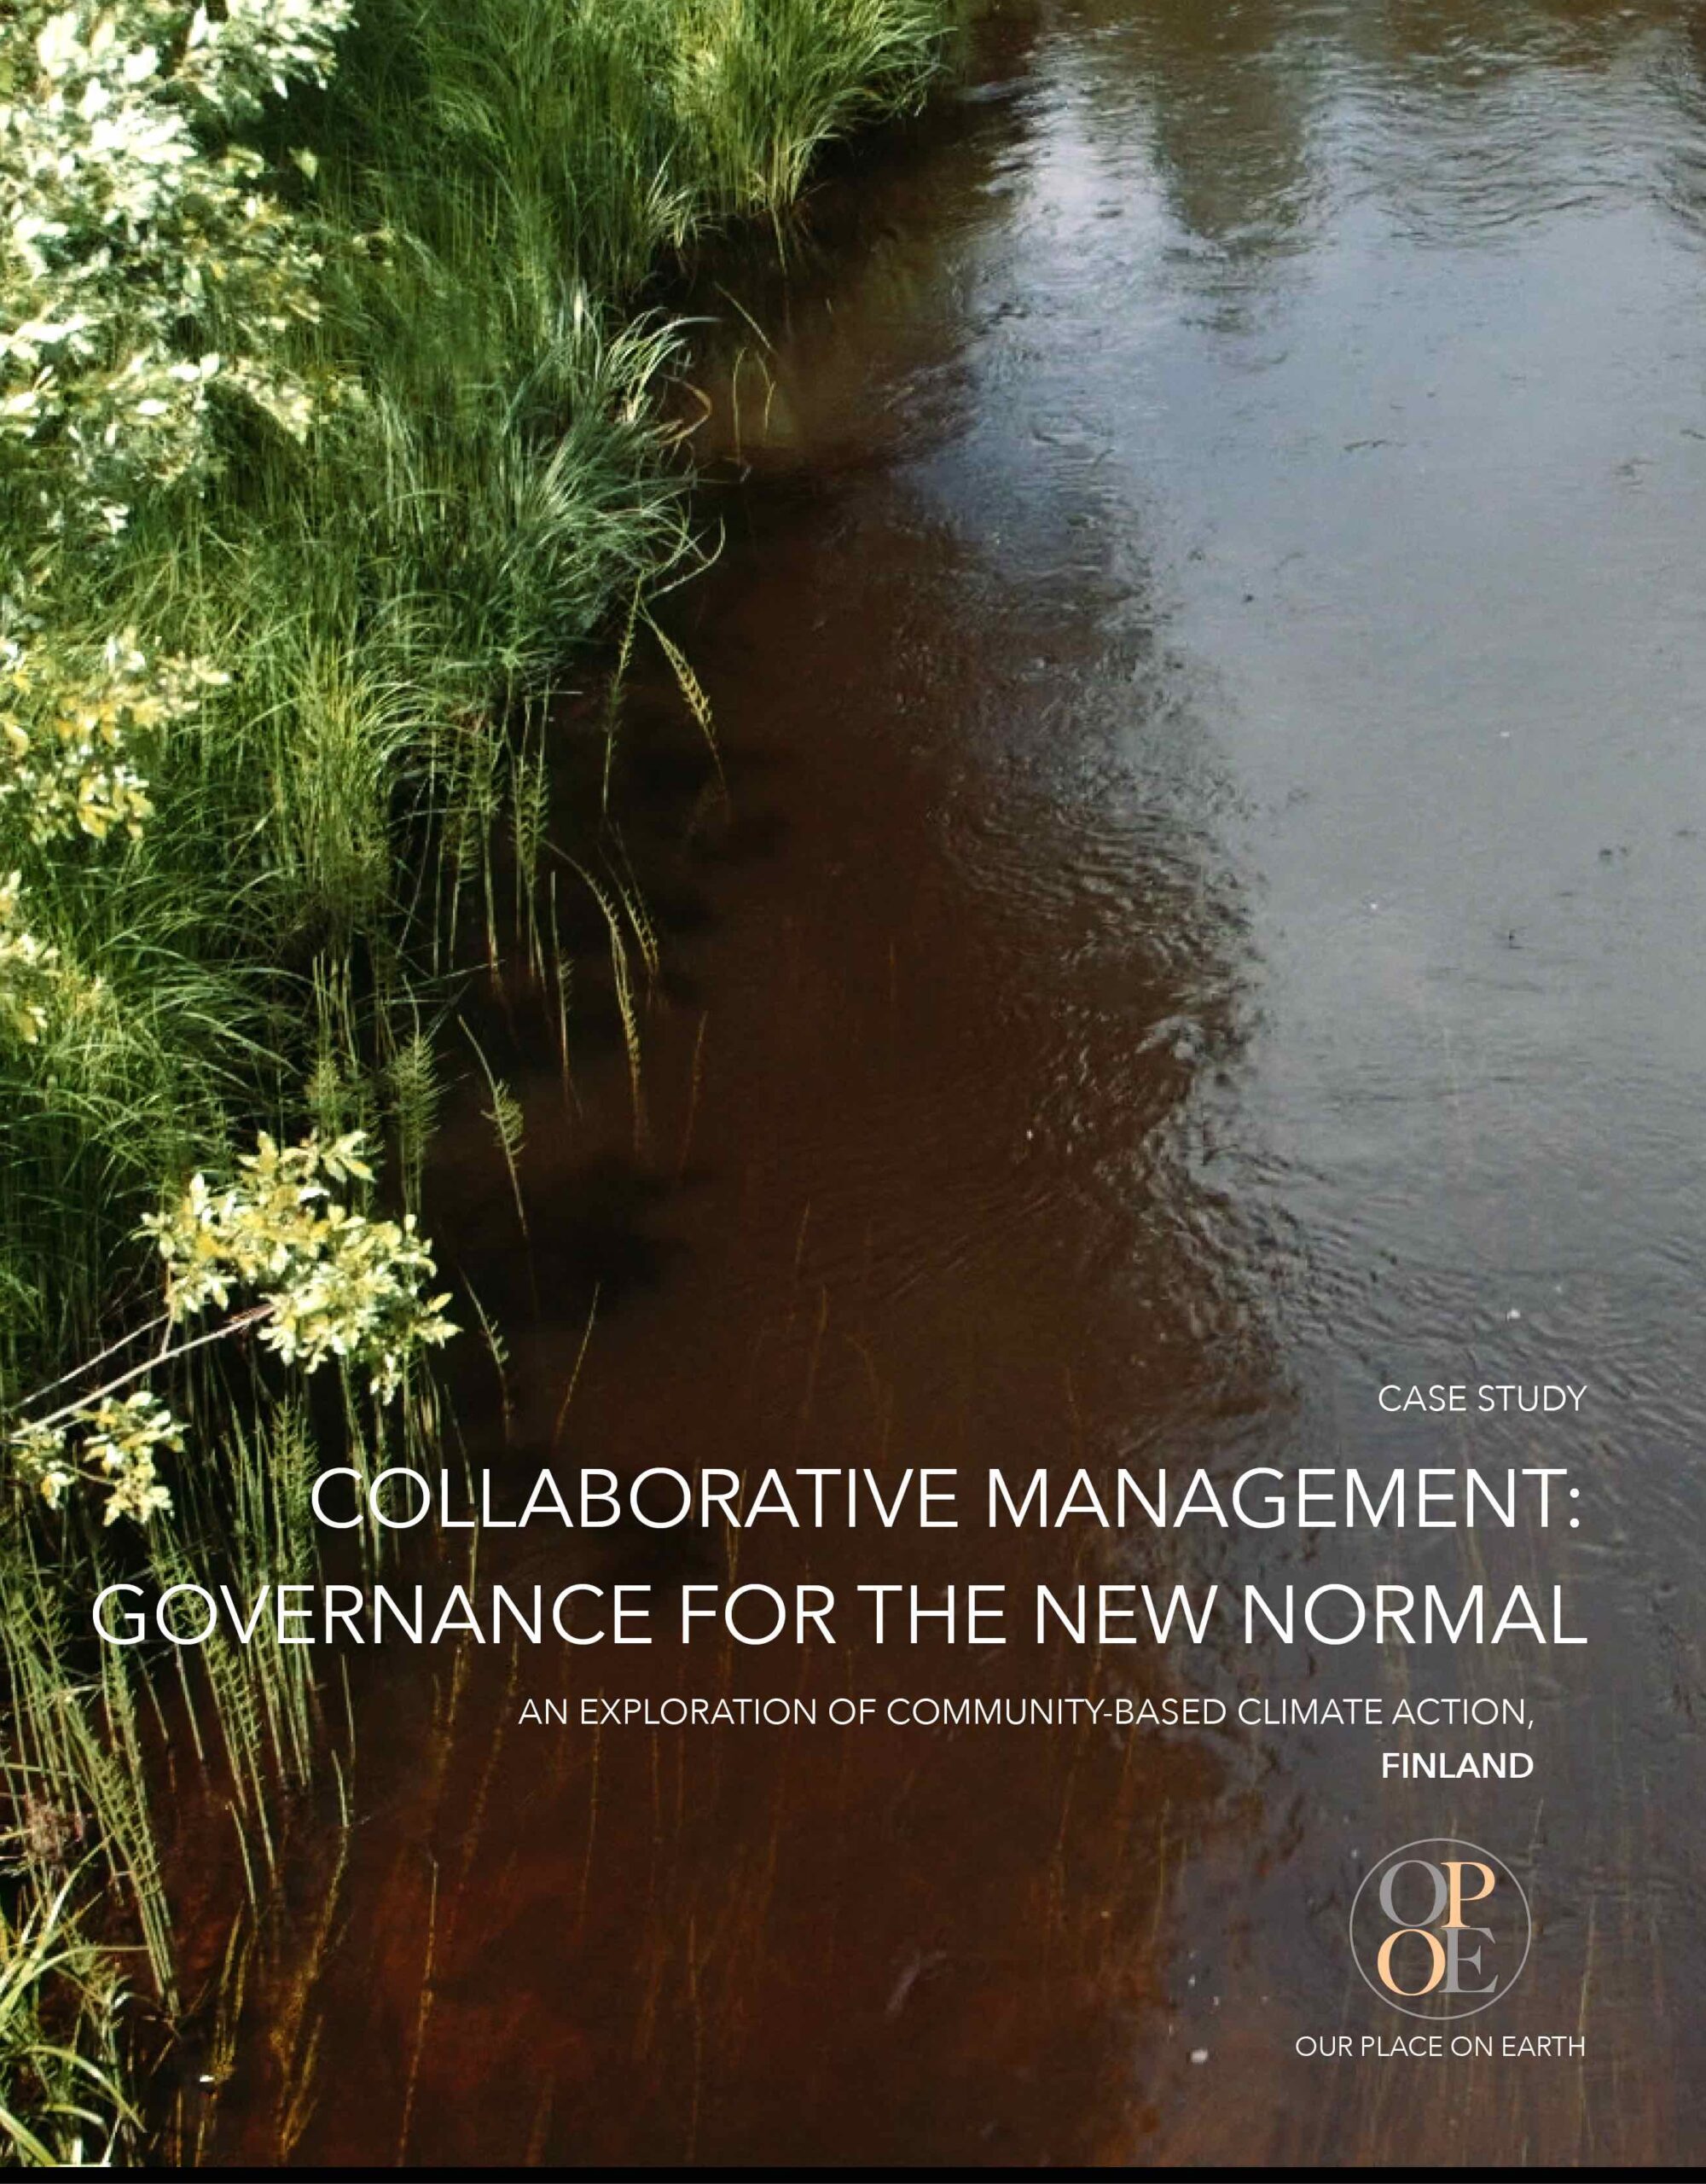 OPOE Case Study - Collaborative Management: governance for the new normal, North Karelia, Finland